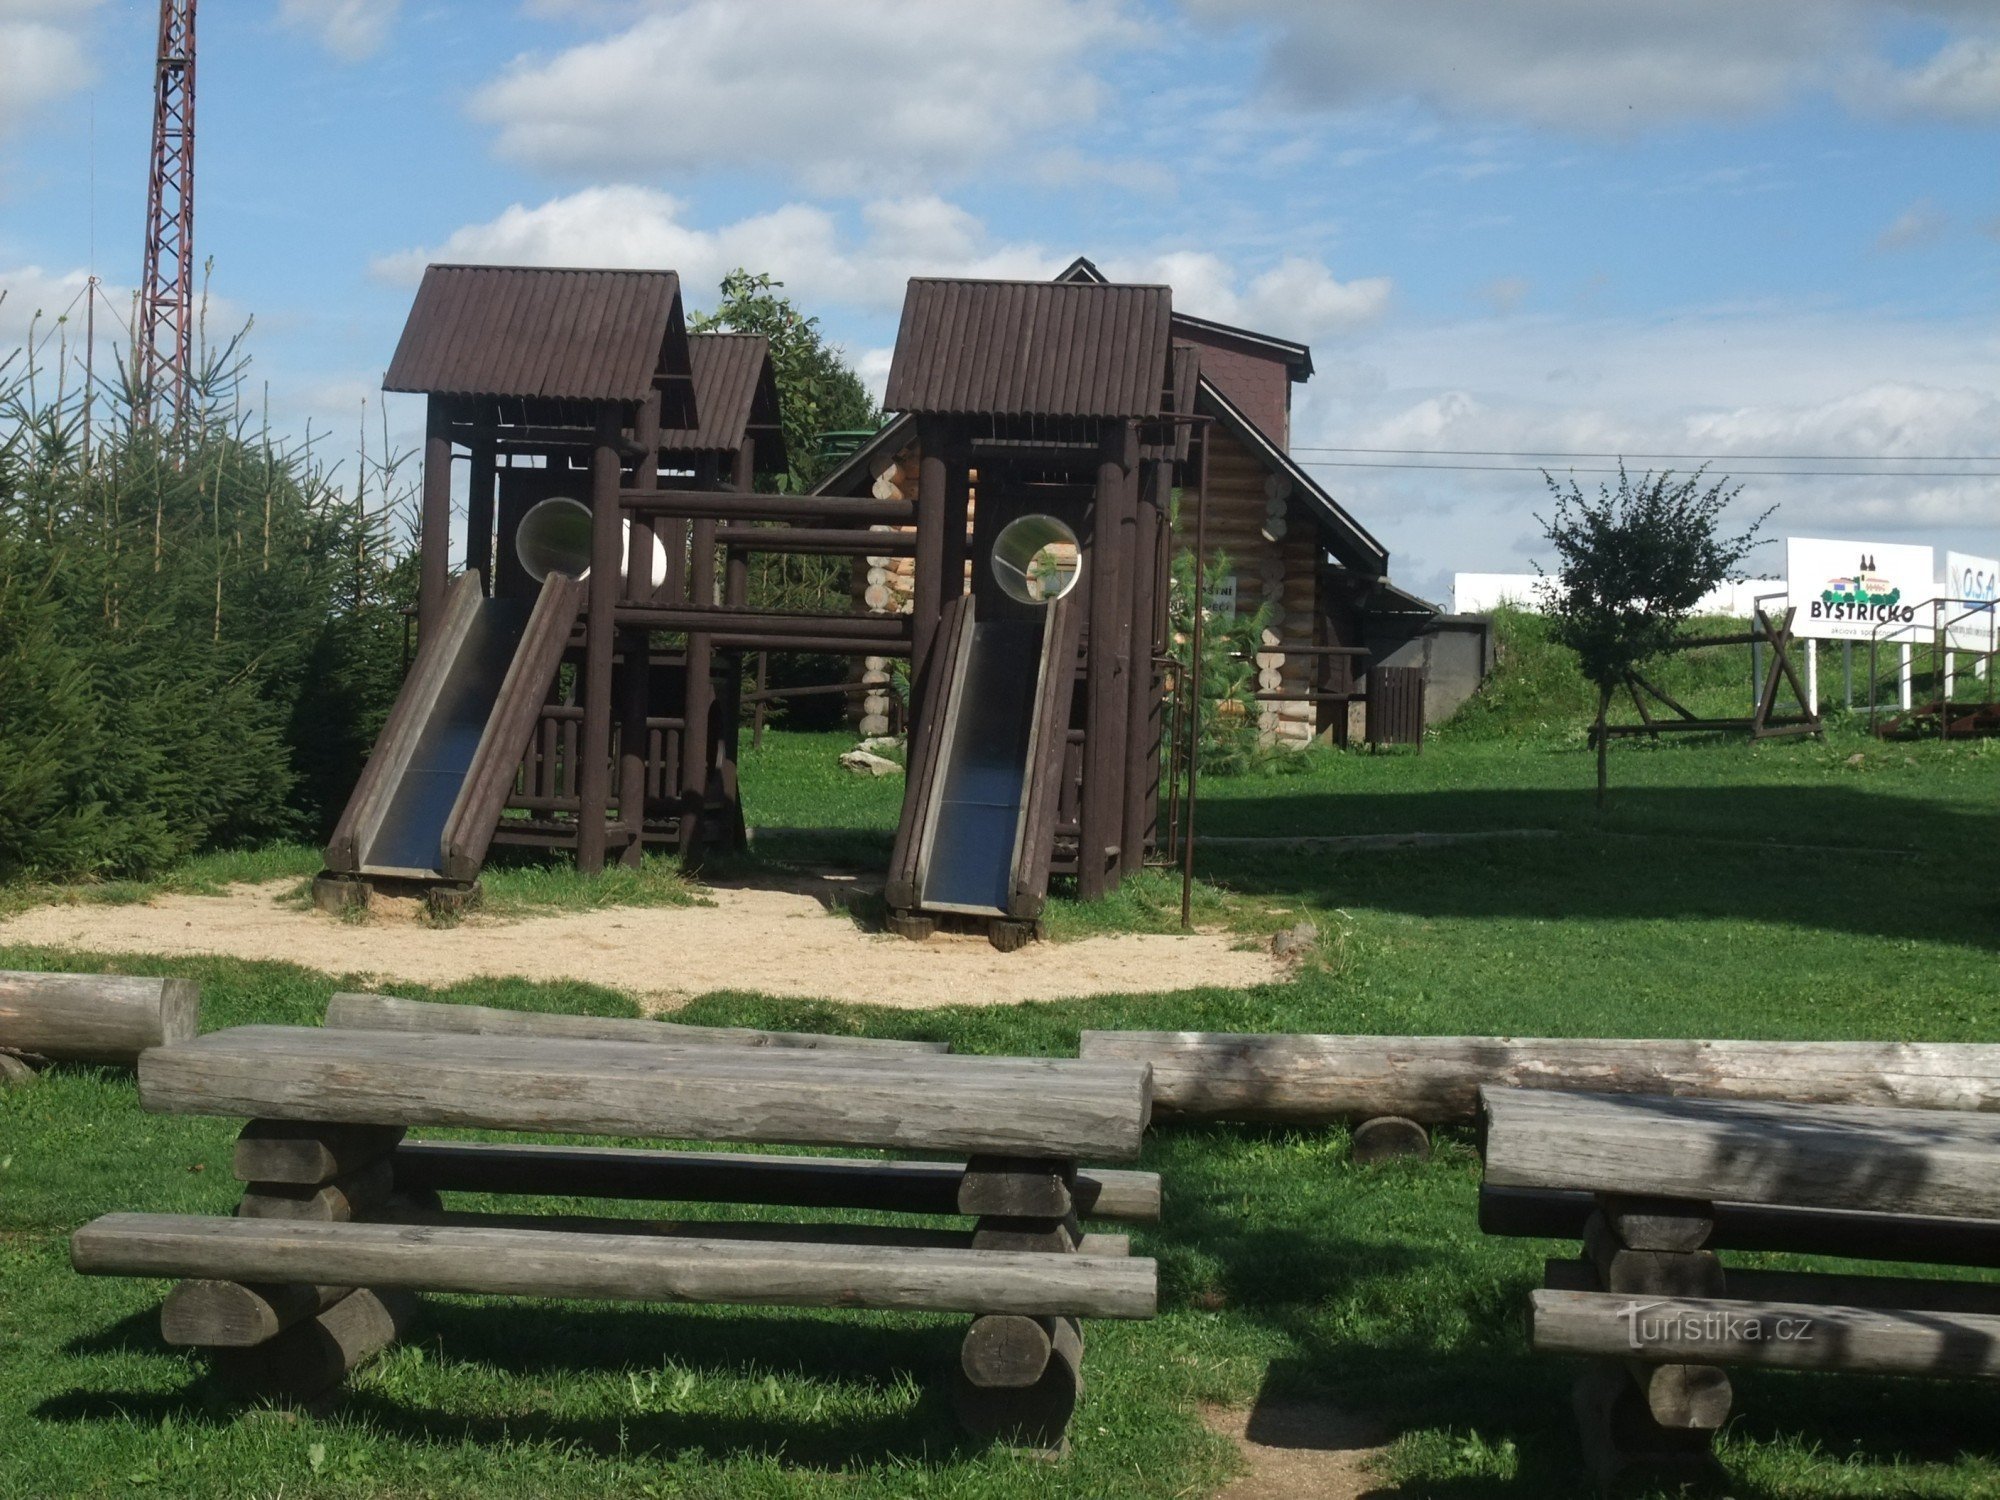 Children's playground by the lookout tower